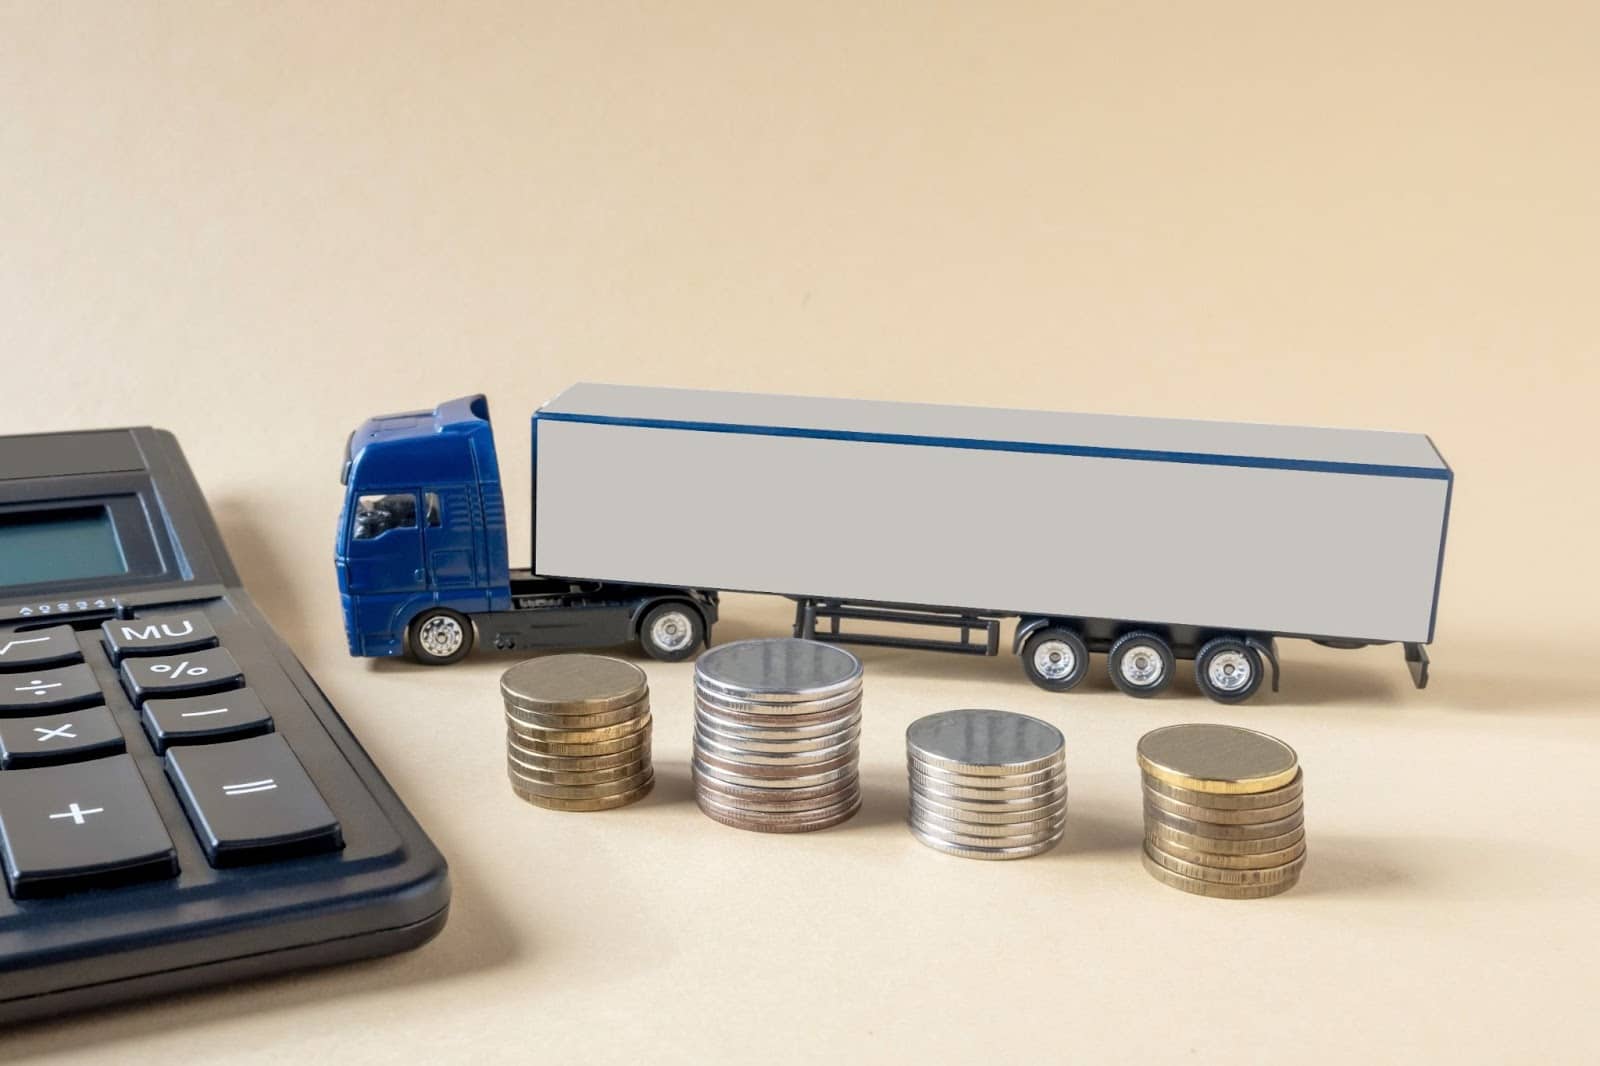 Toy truck next to calculator and stacks of silver coins